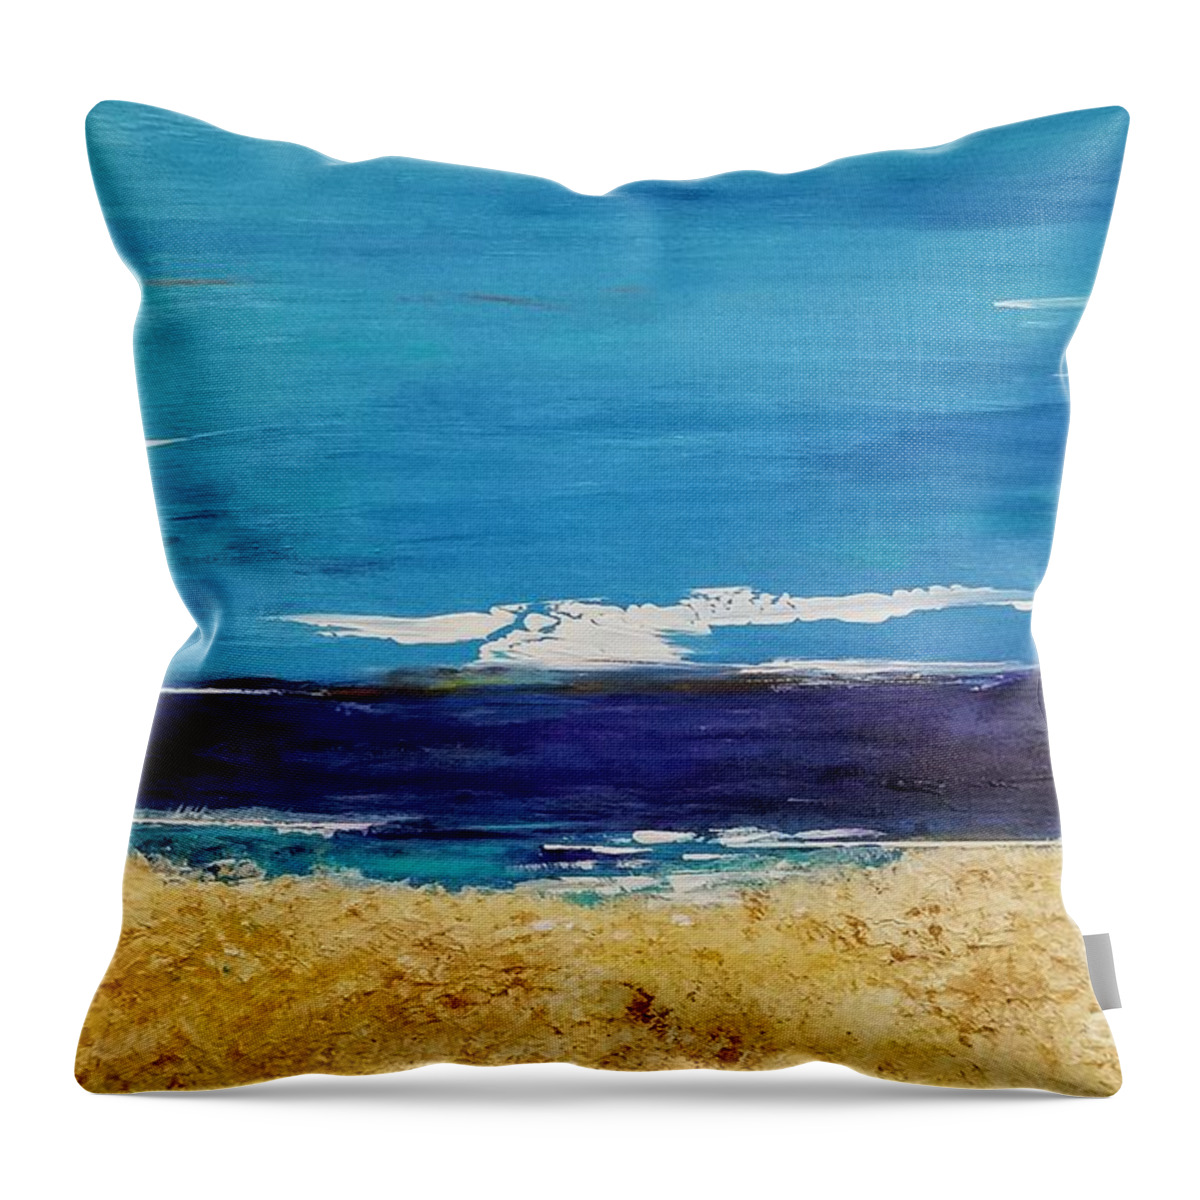 Ocean Throw Pillow featuring the painting Ocean 1 by Diana Bursztein